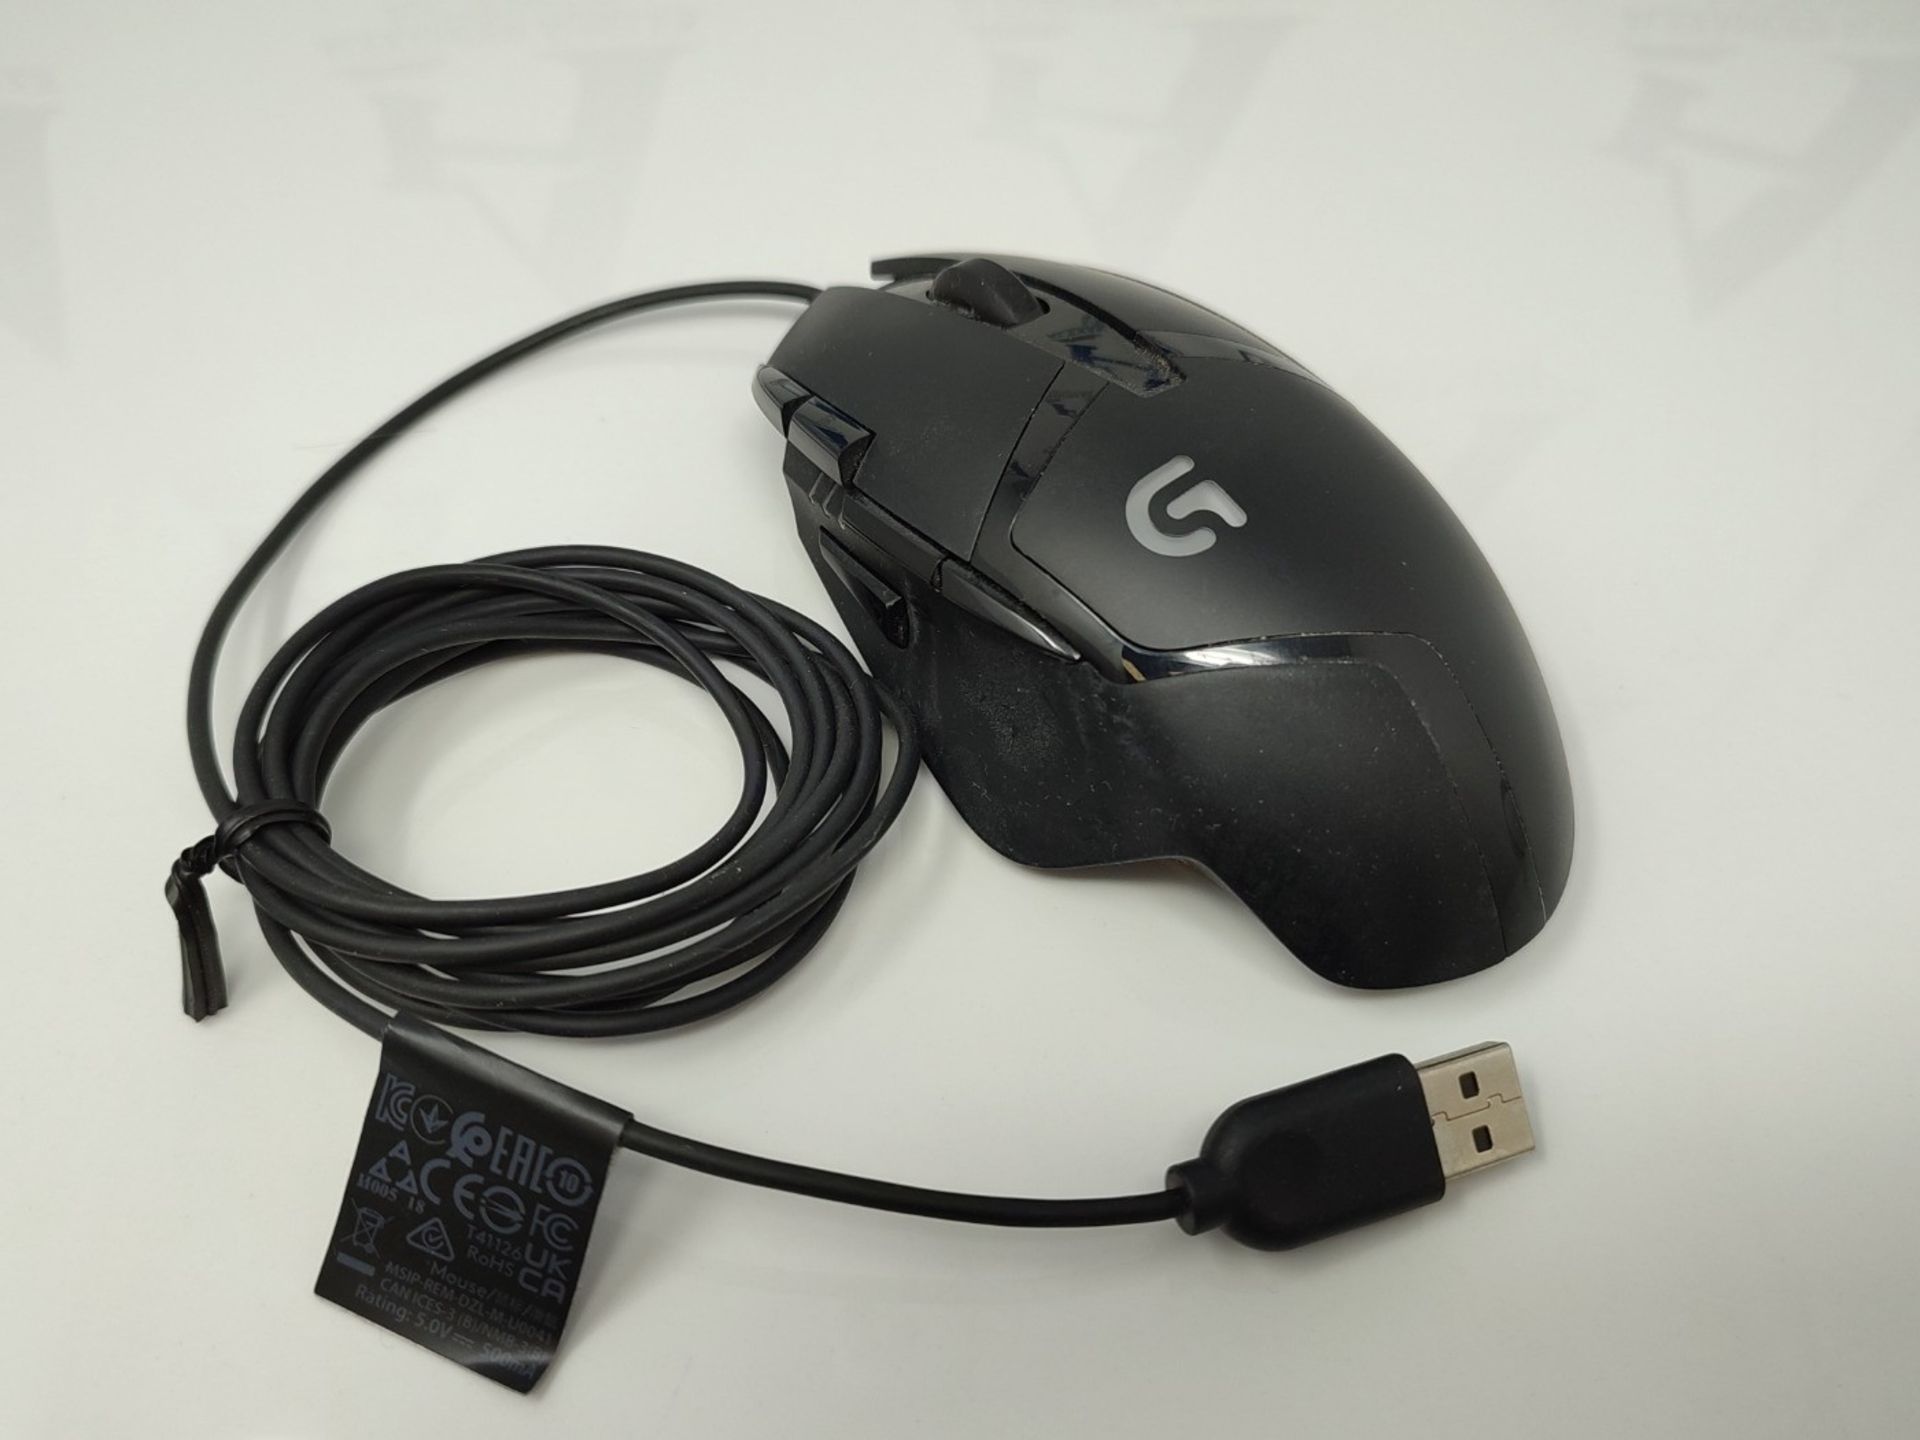 Logitech G402 Hyperion Fury Wired Gaming Mouse, Optical Tracking 4,000 DPI, Ultra-Ligh - Image 2 of 3